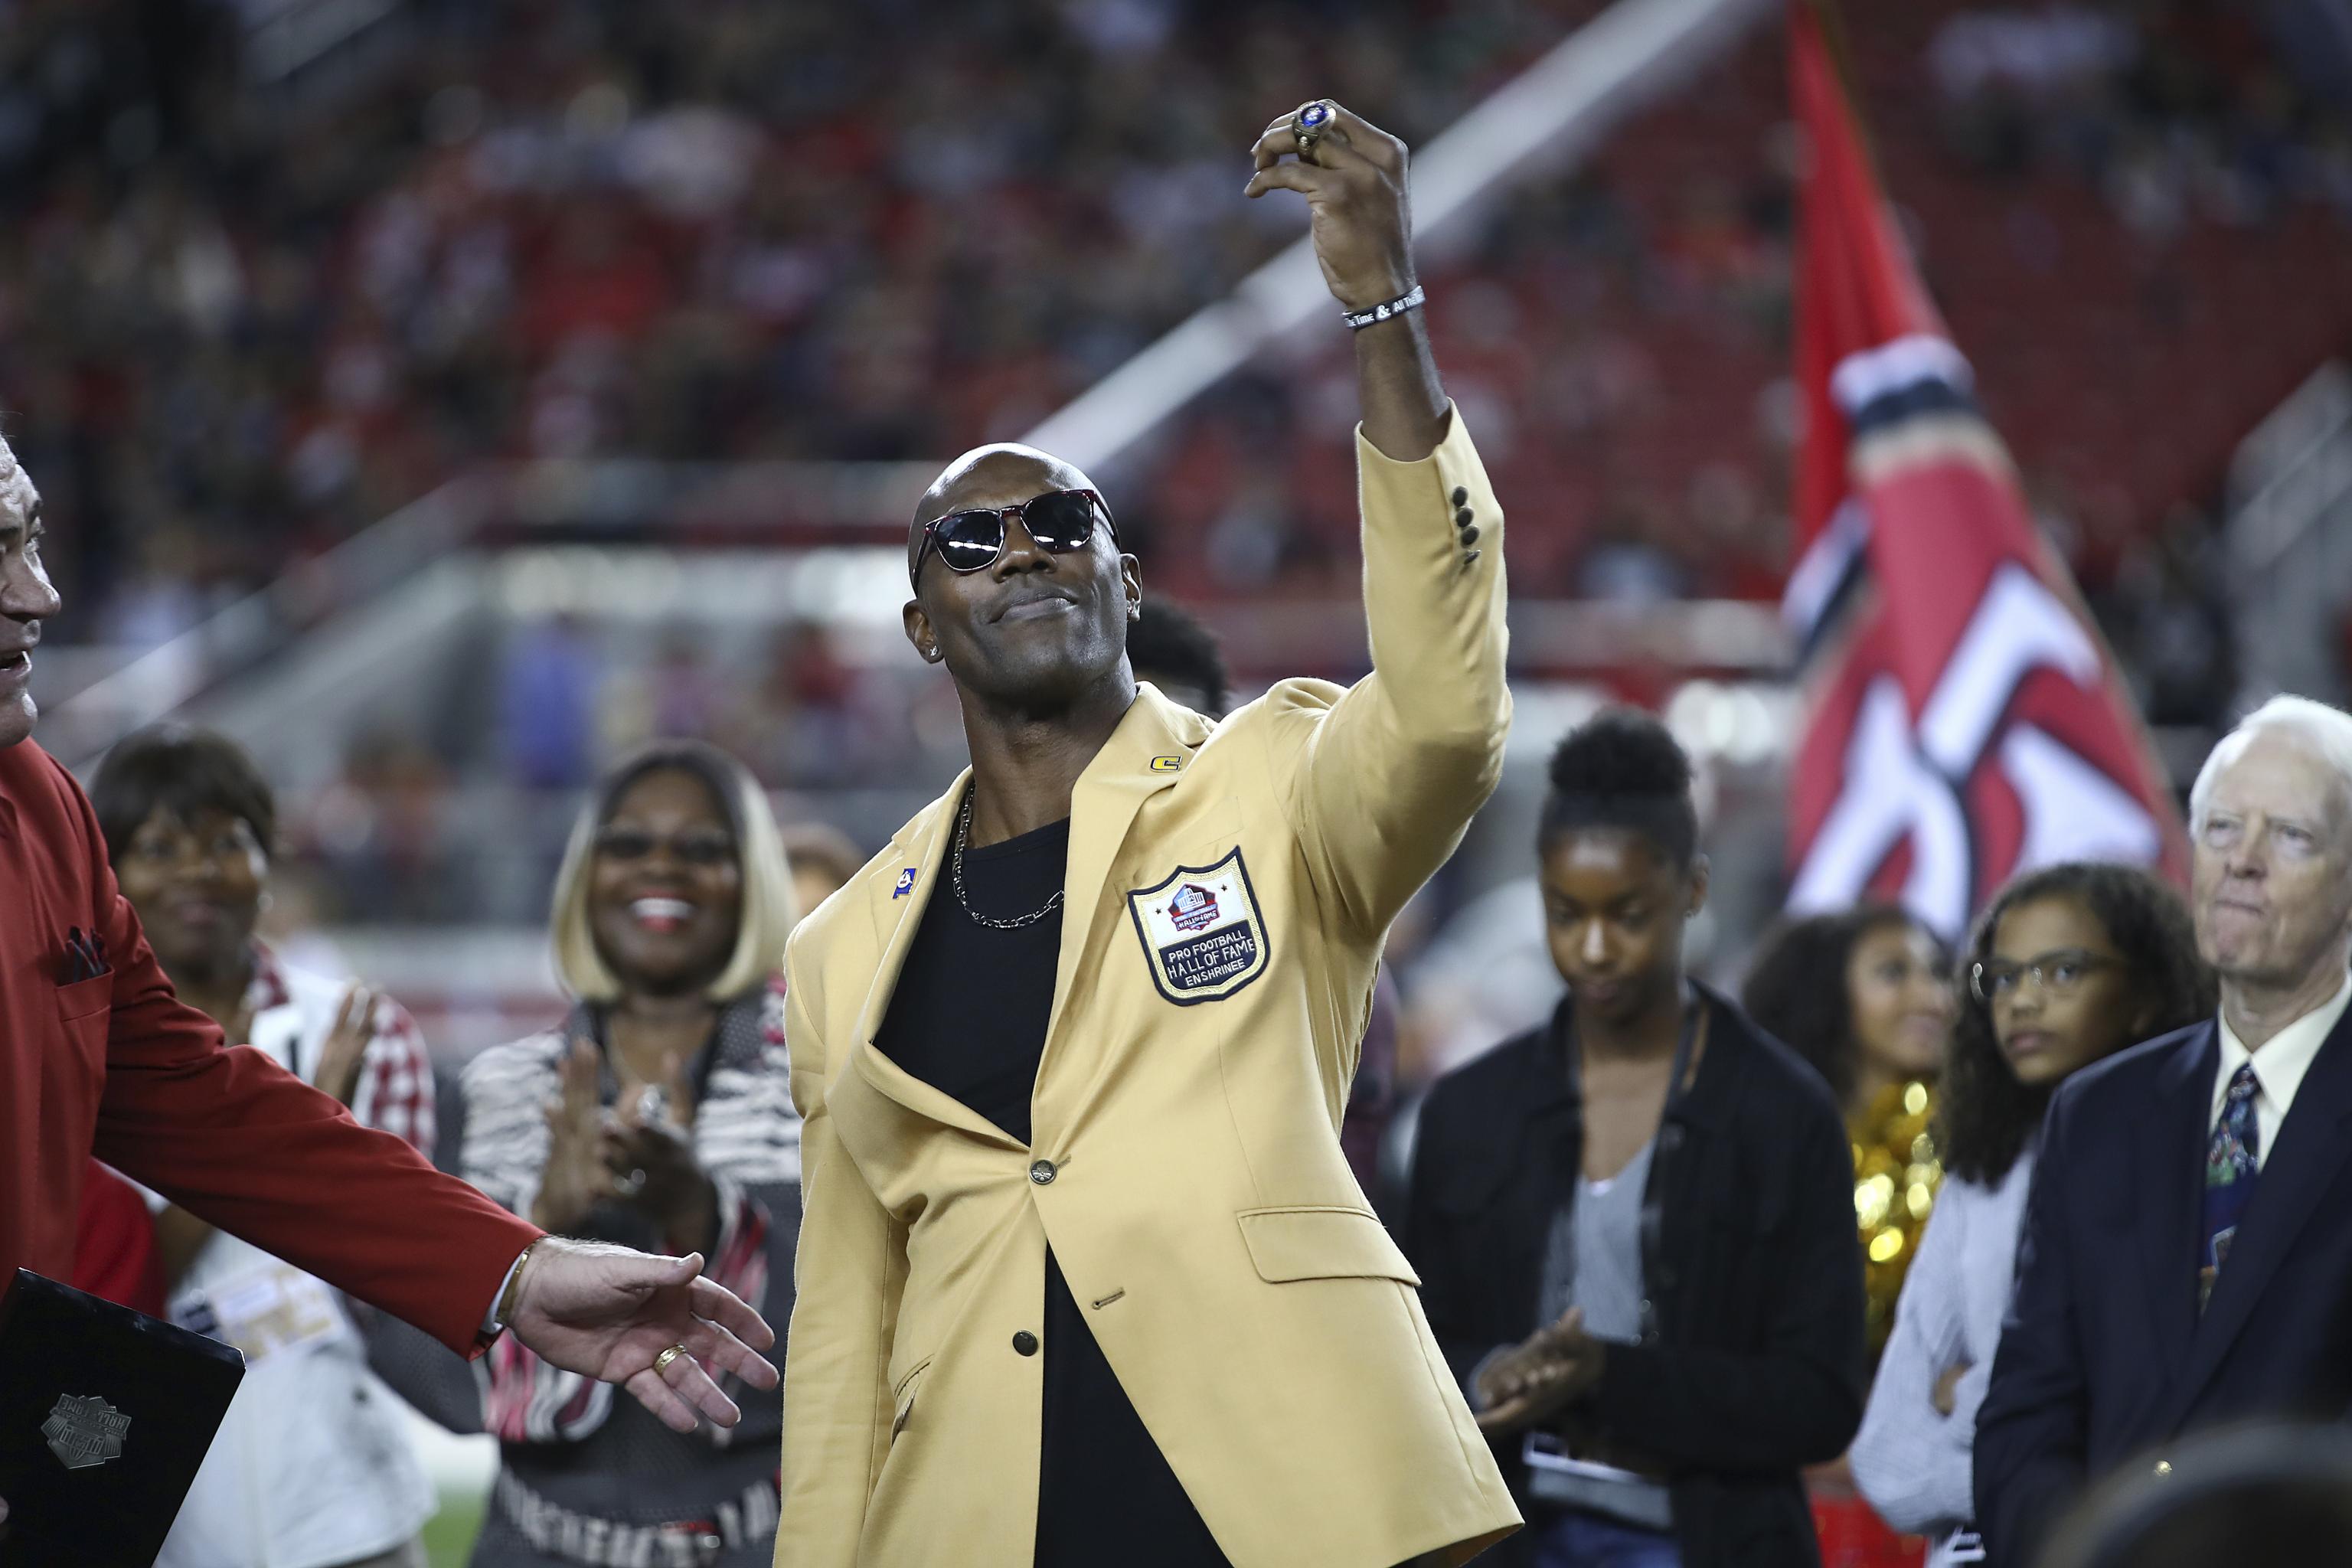 Terrell Owens to attend 49ers game, receive Hall of Fame ring